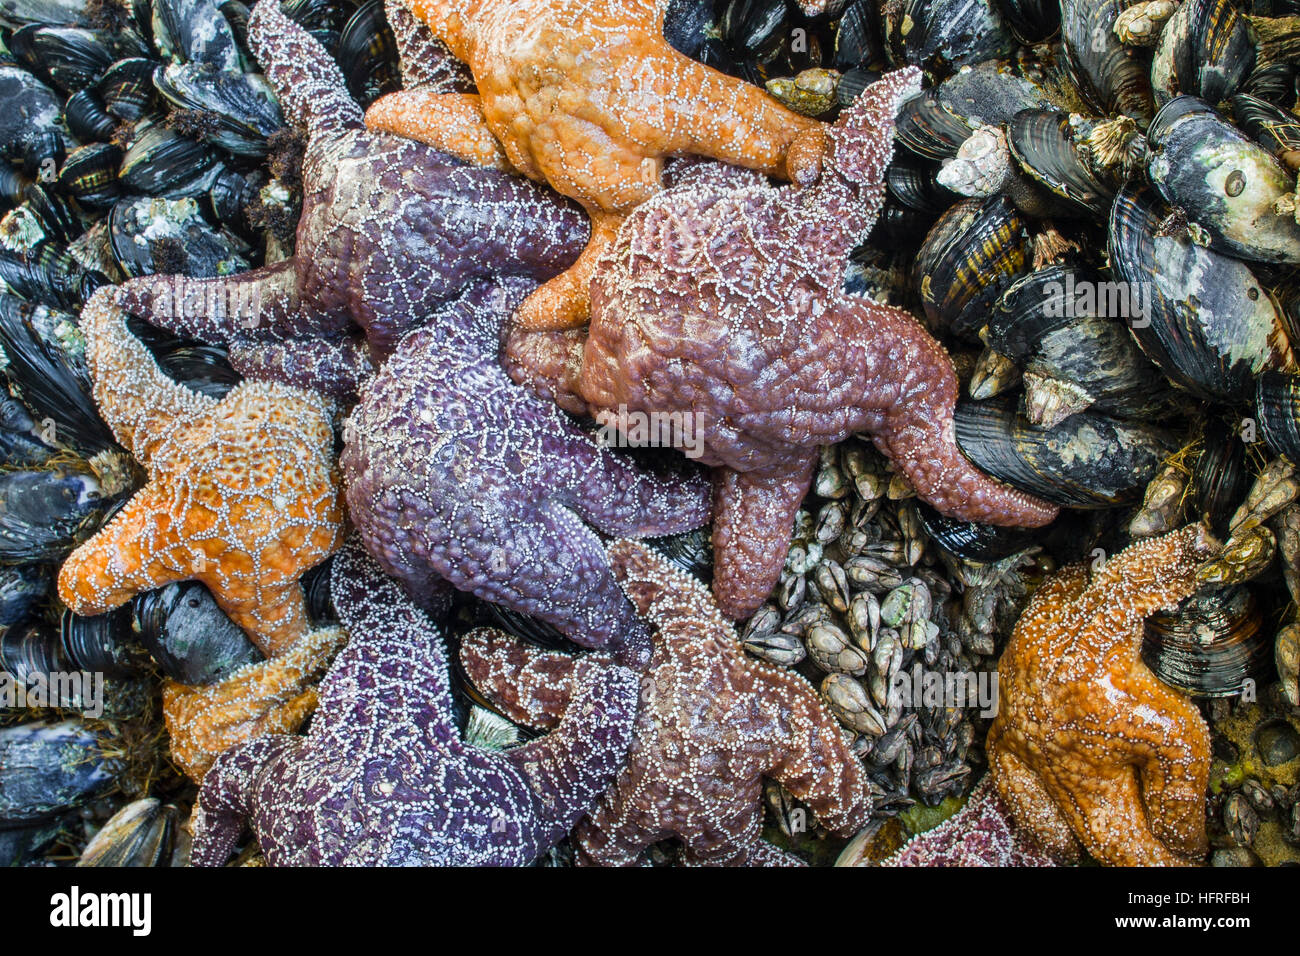 A group of sea stars eating mussels. Stock Photo